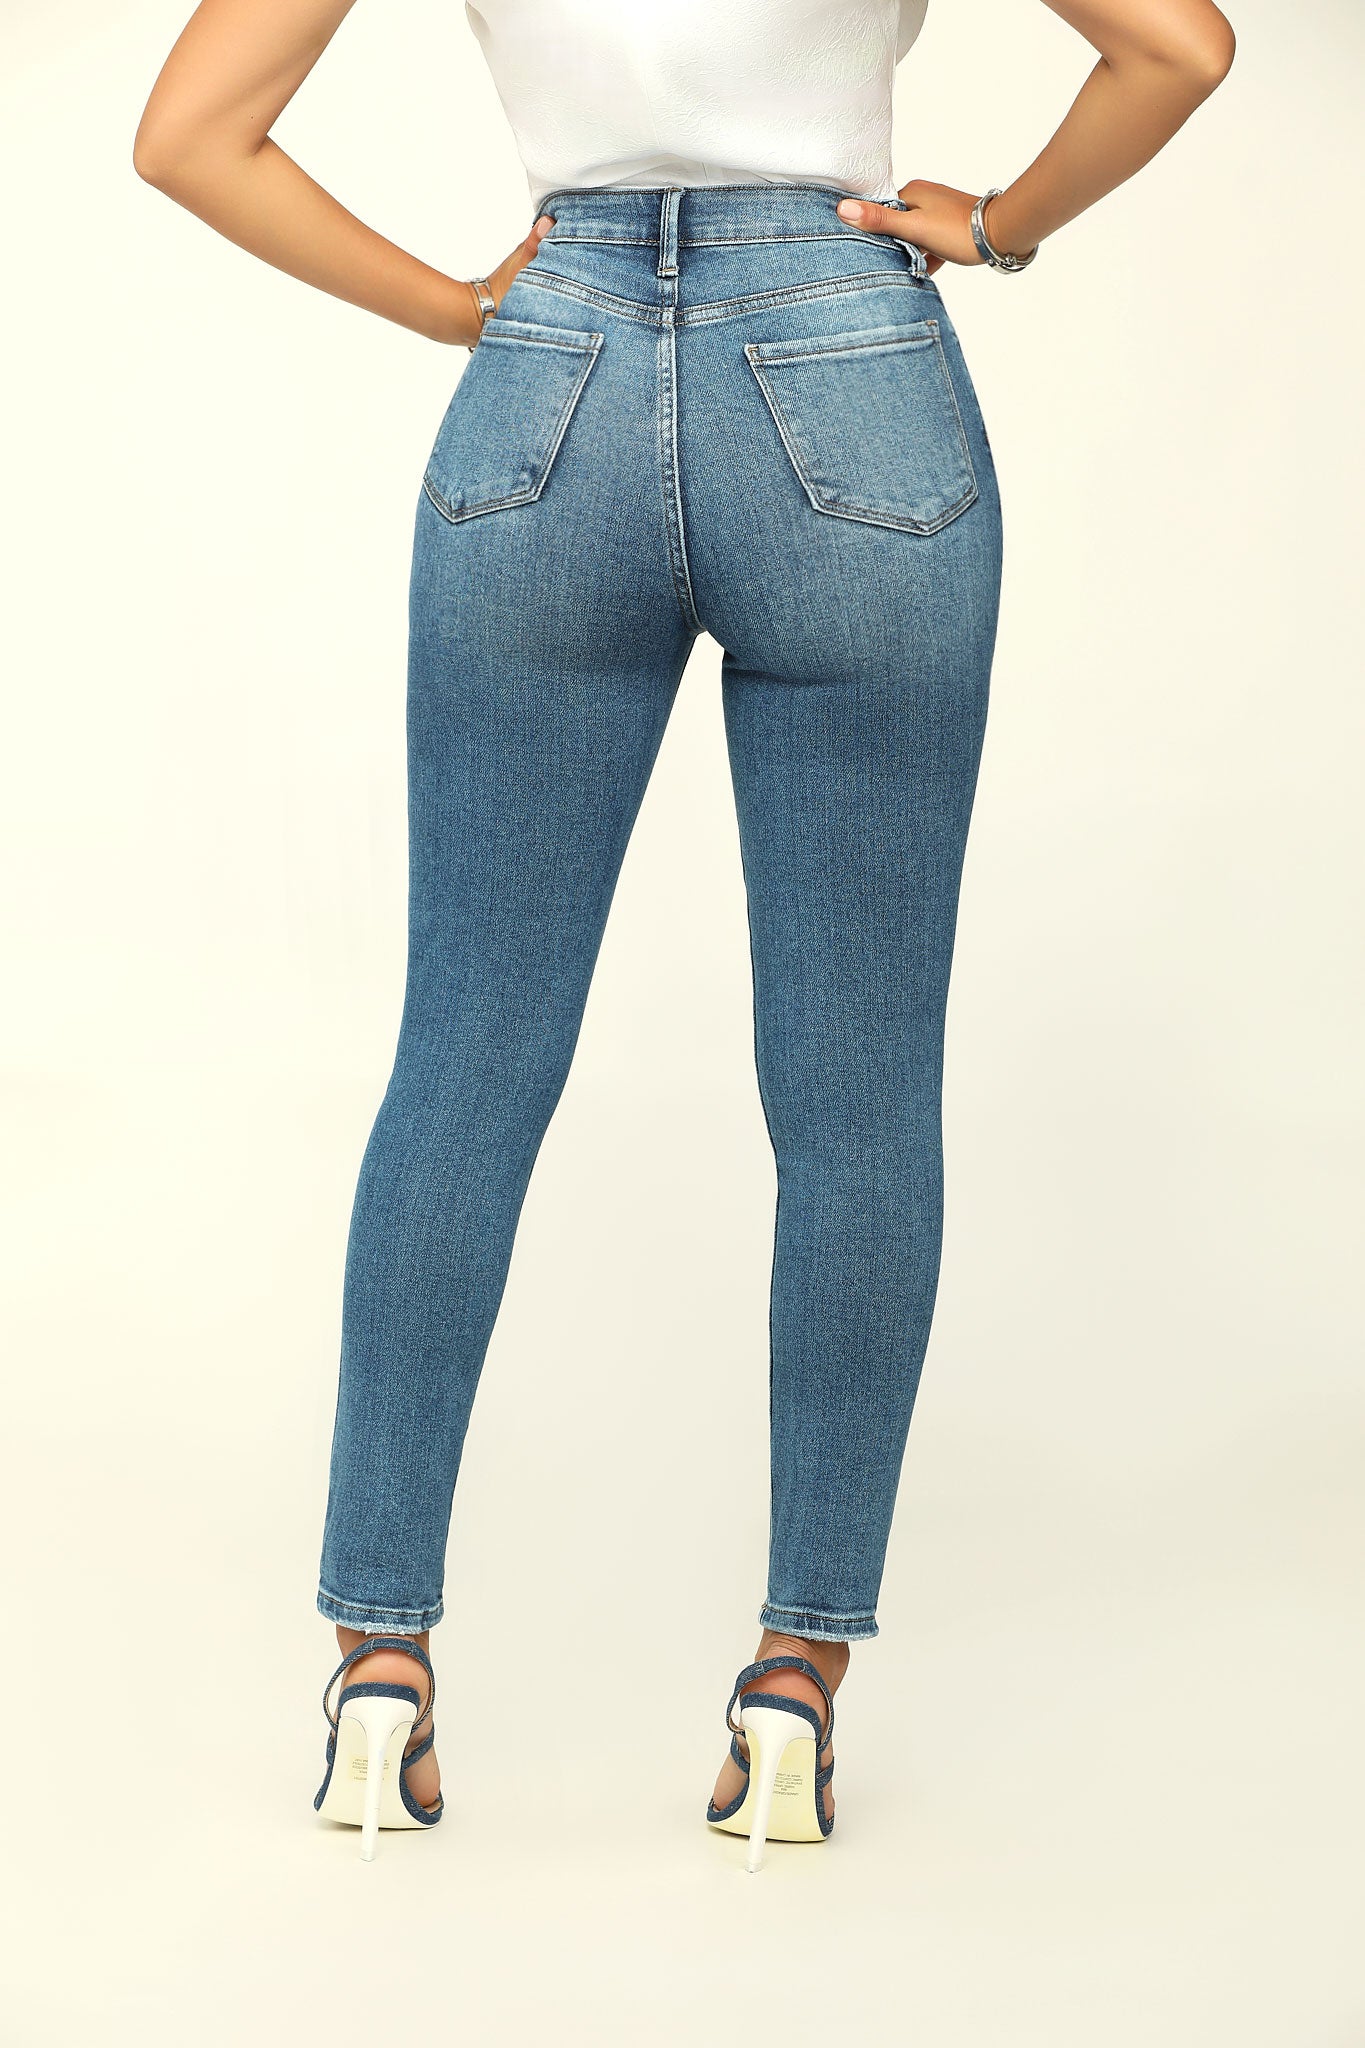 FIRST CHOICE SKINNY JEANS